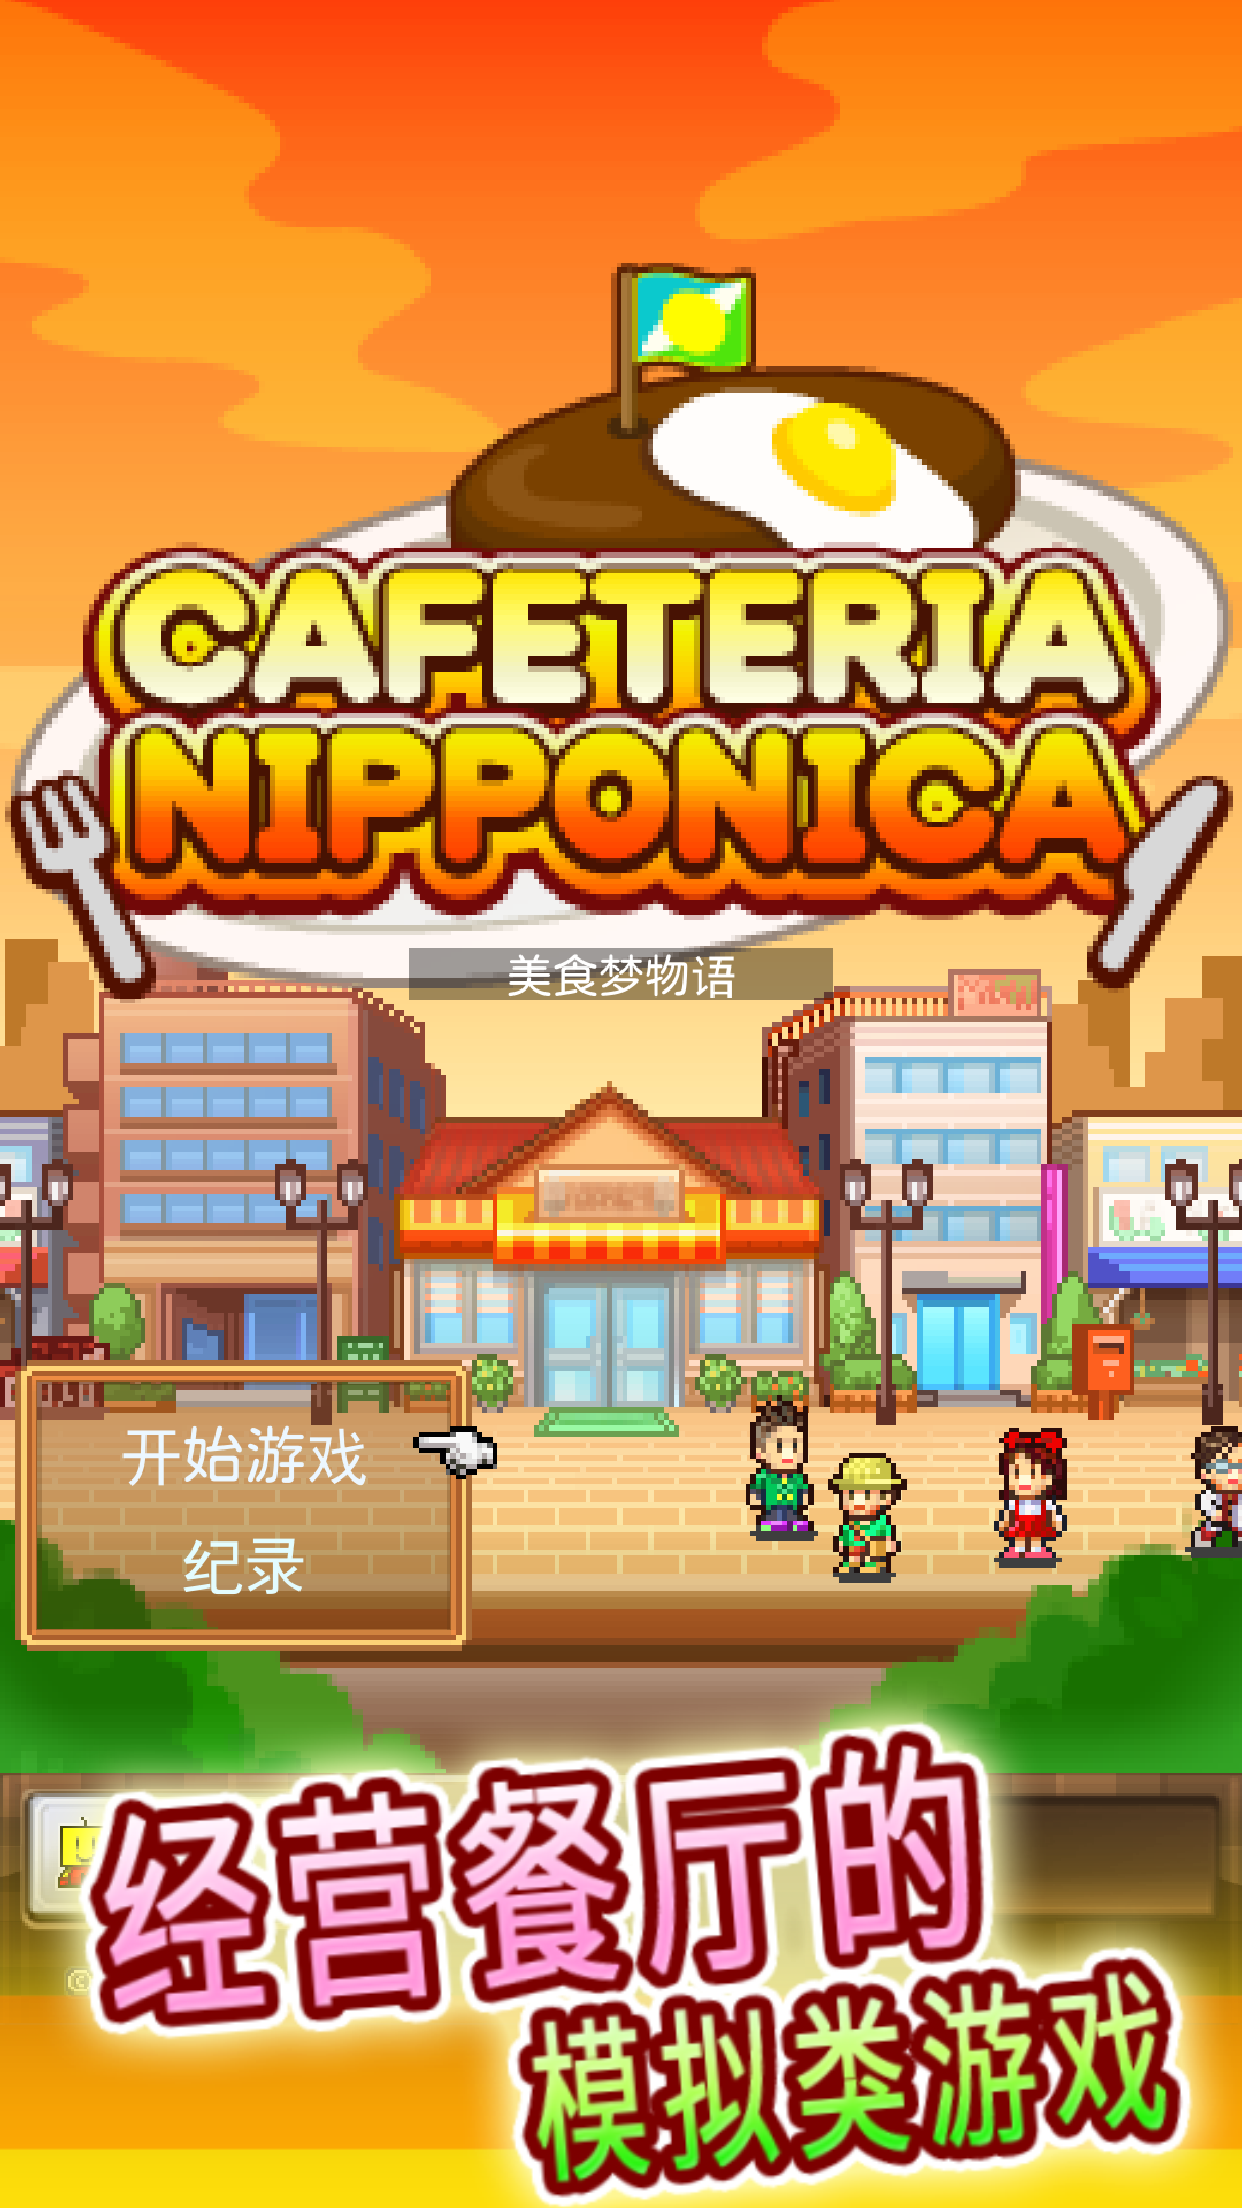 Banner of Hapon cafeteria 